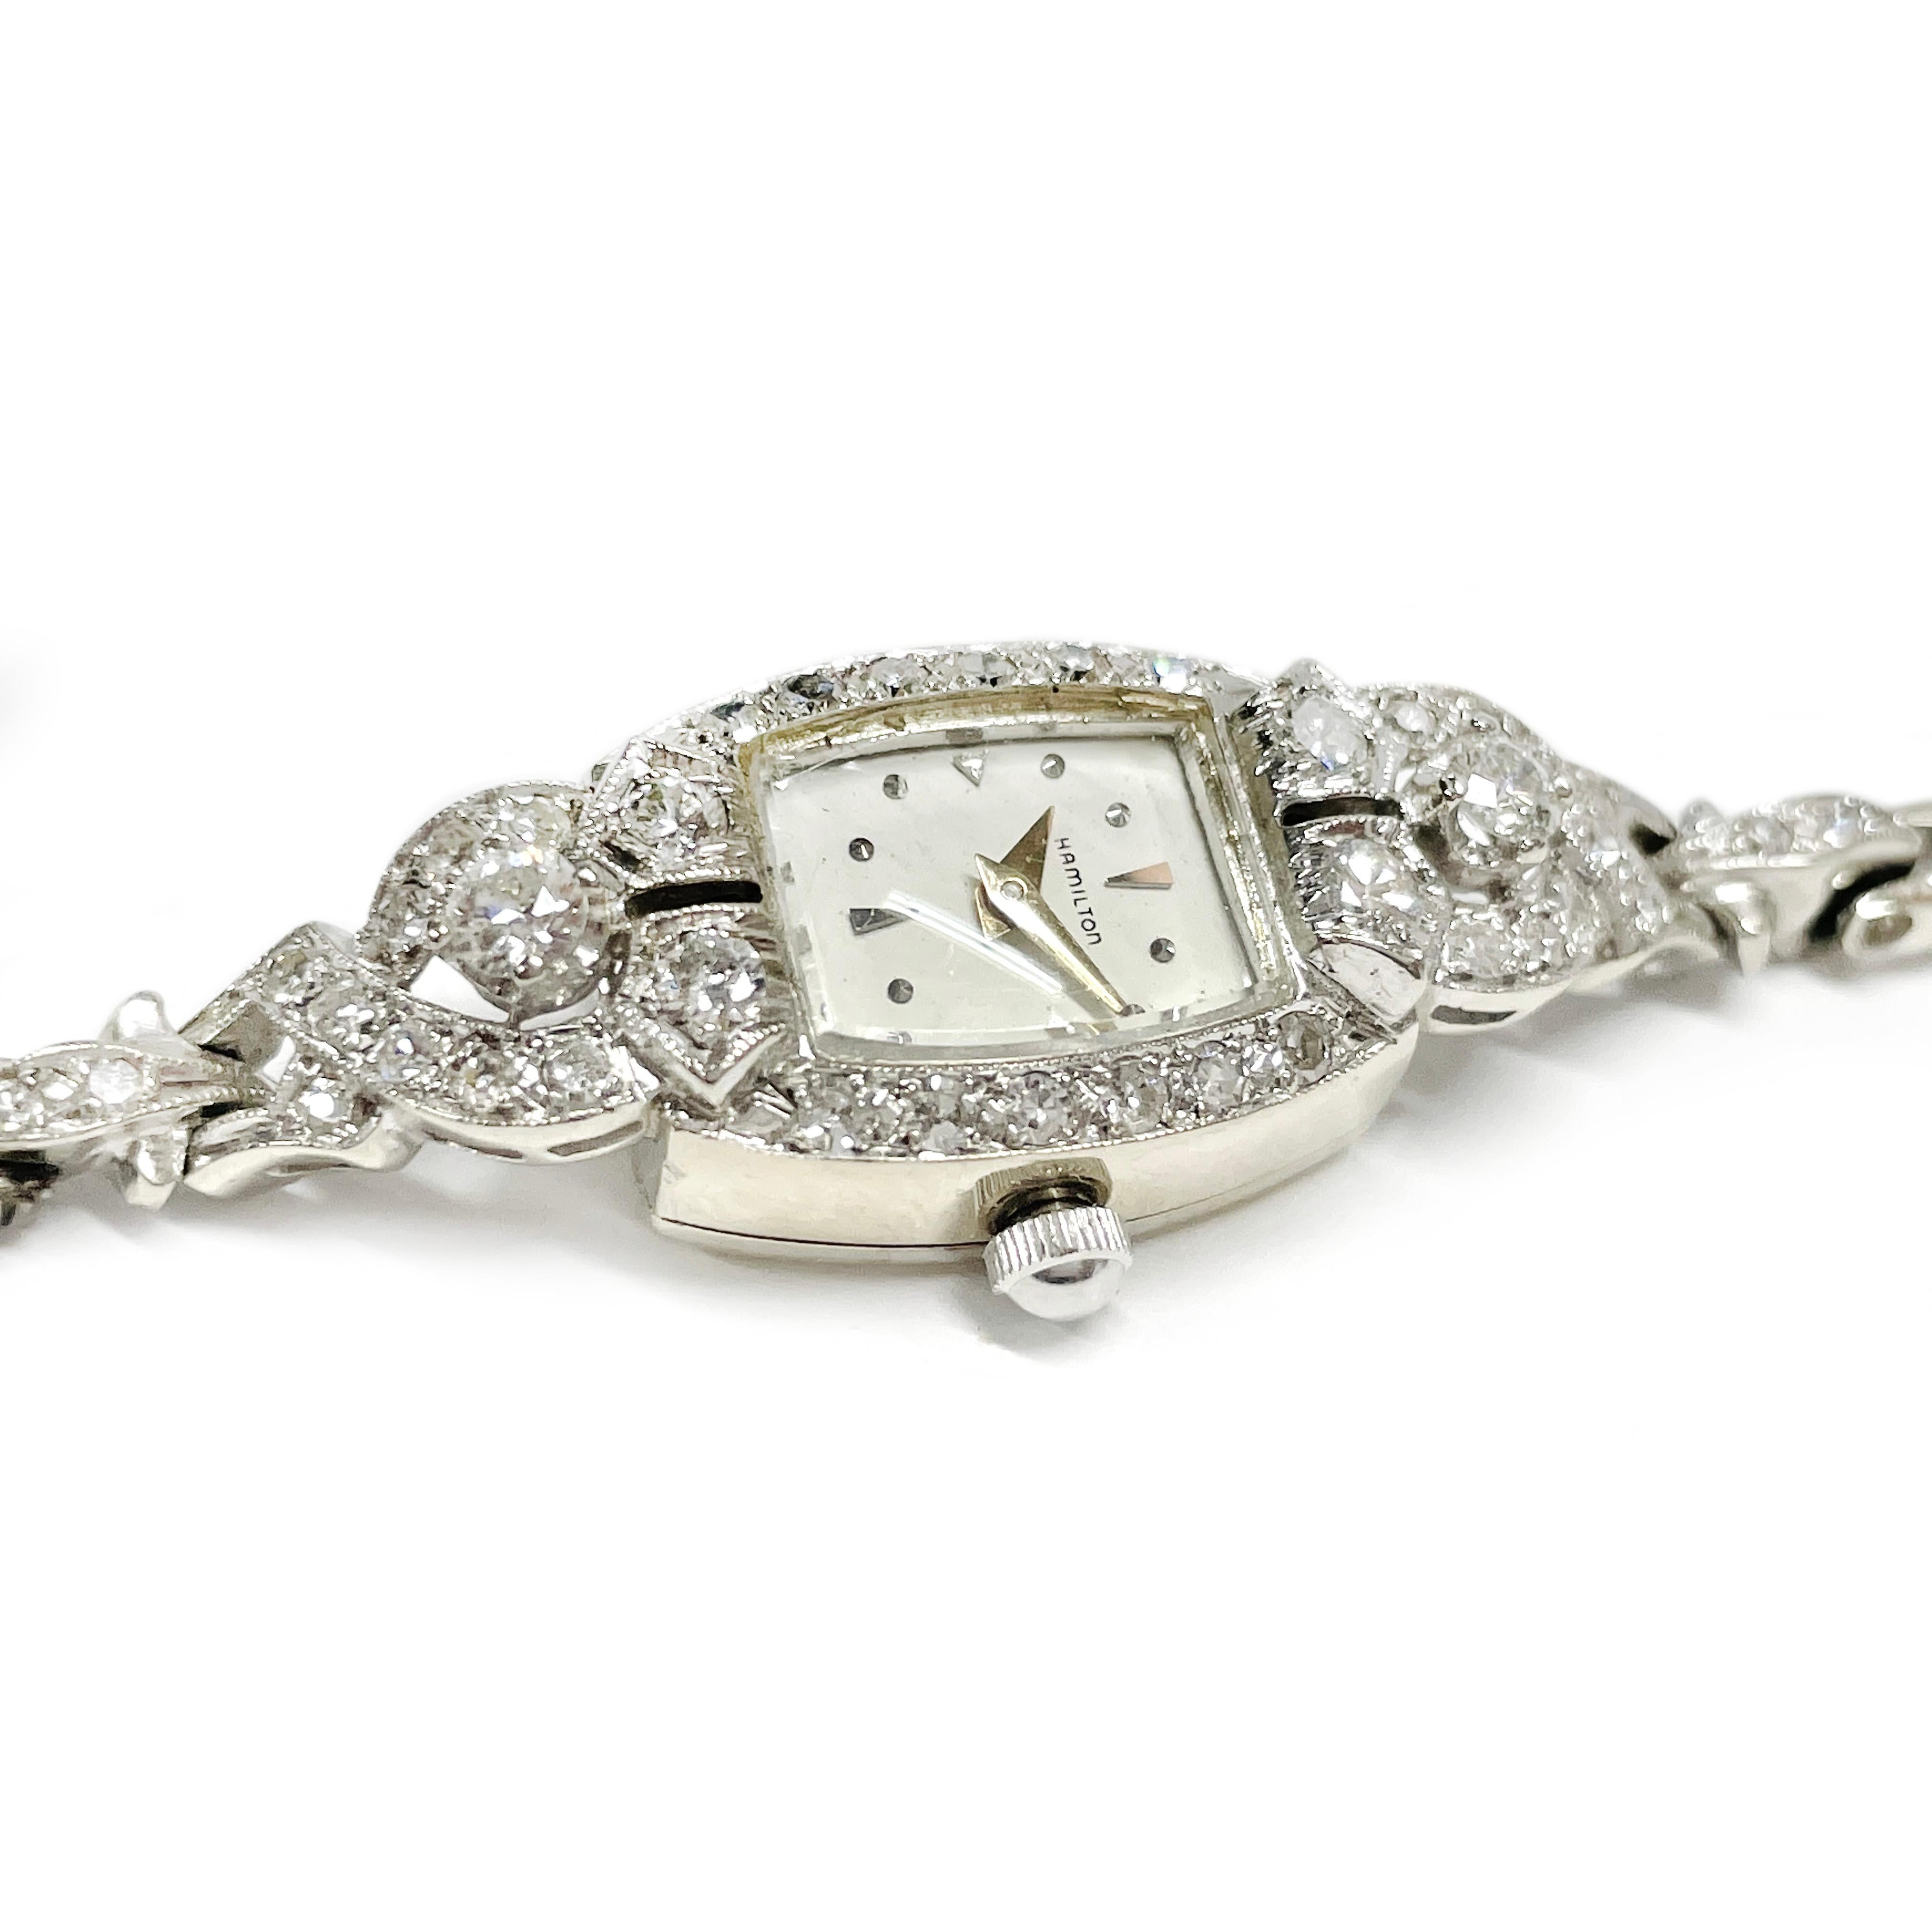 Vintage Art Deco Hamilton Ladies White Gold Diamond Bracelet Watch. The rounded rectangle-faced dial with framed in round diamonds with yellow gold hour and minute hands. This lovely ladies watch sparkles with forty-eight round diamonds total. The